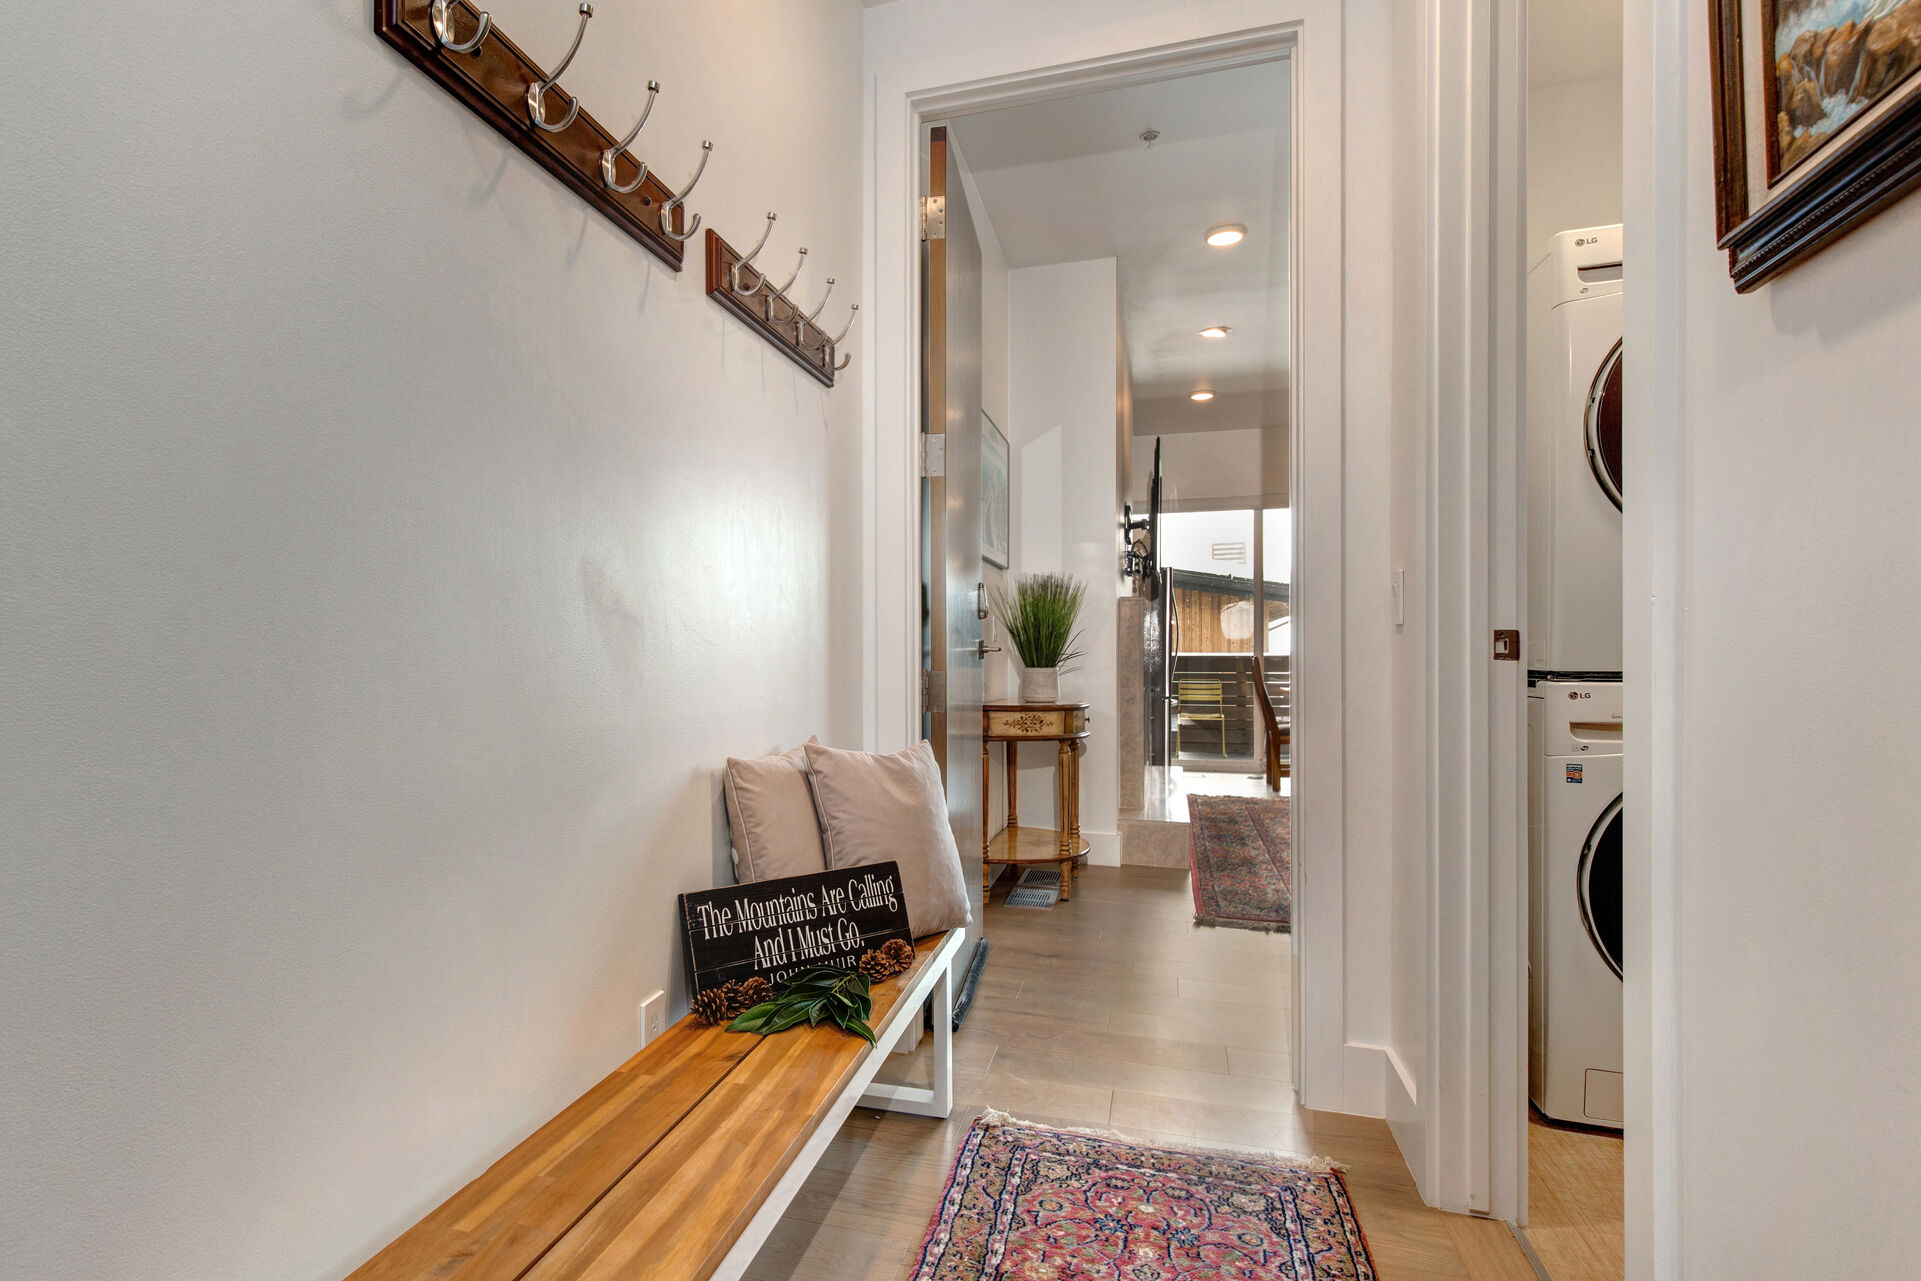 Shared Interior Hallway with a Bench and Coat Racks, Shared Laundry and Condo Entry Door